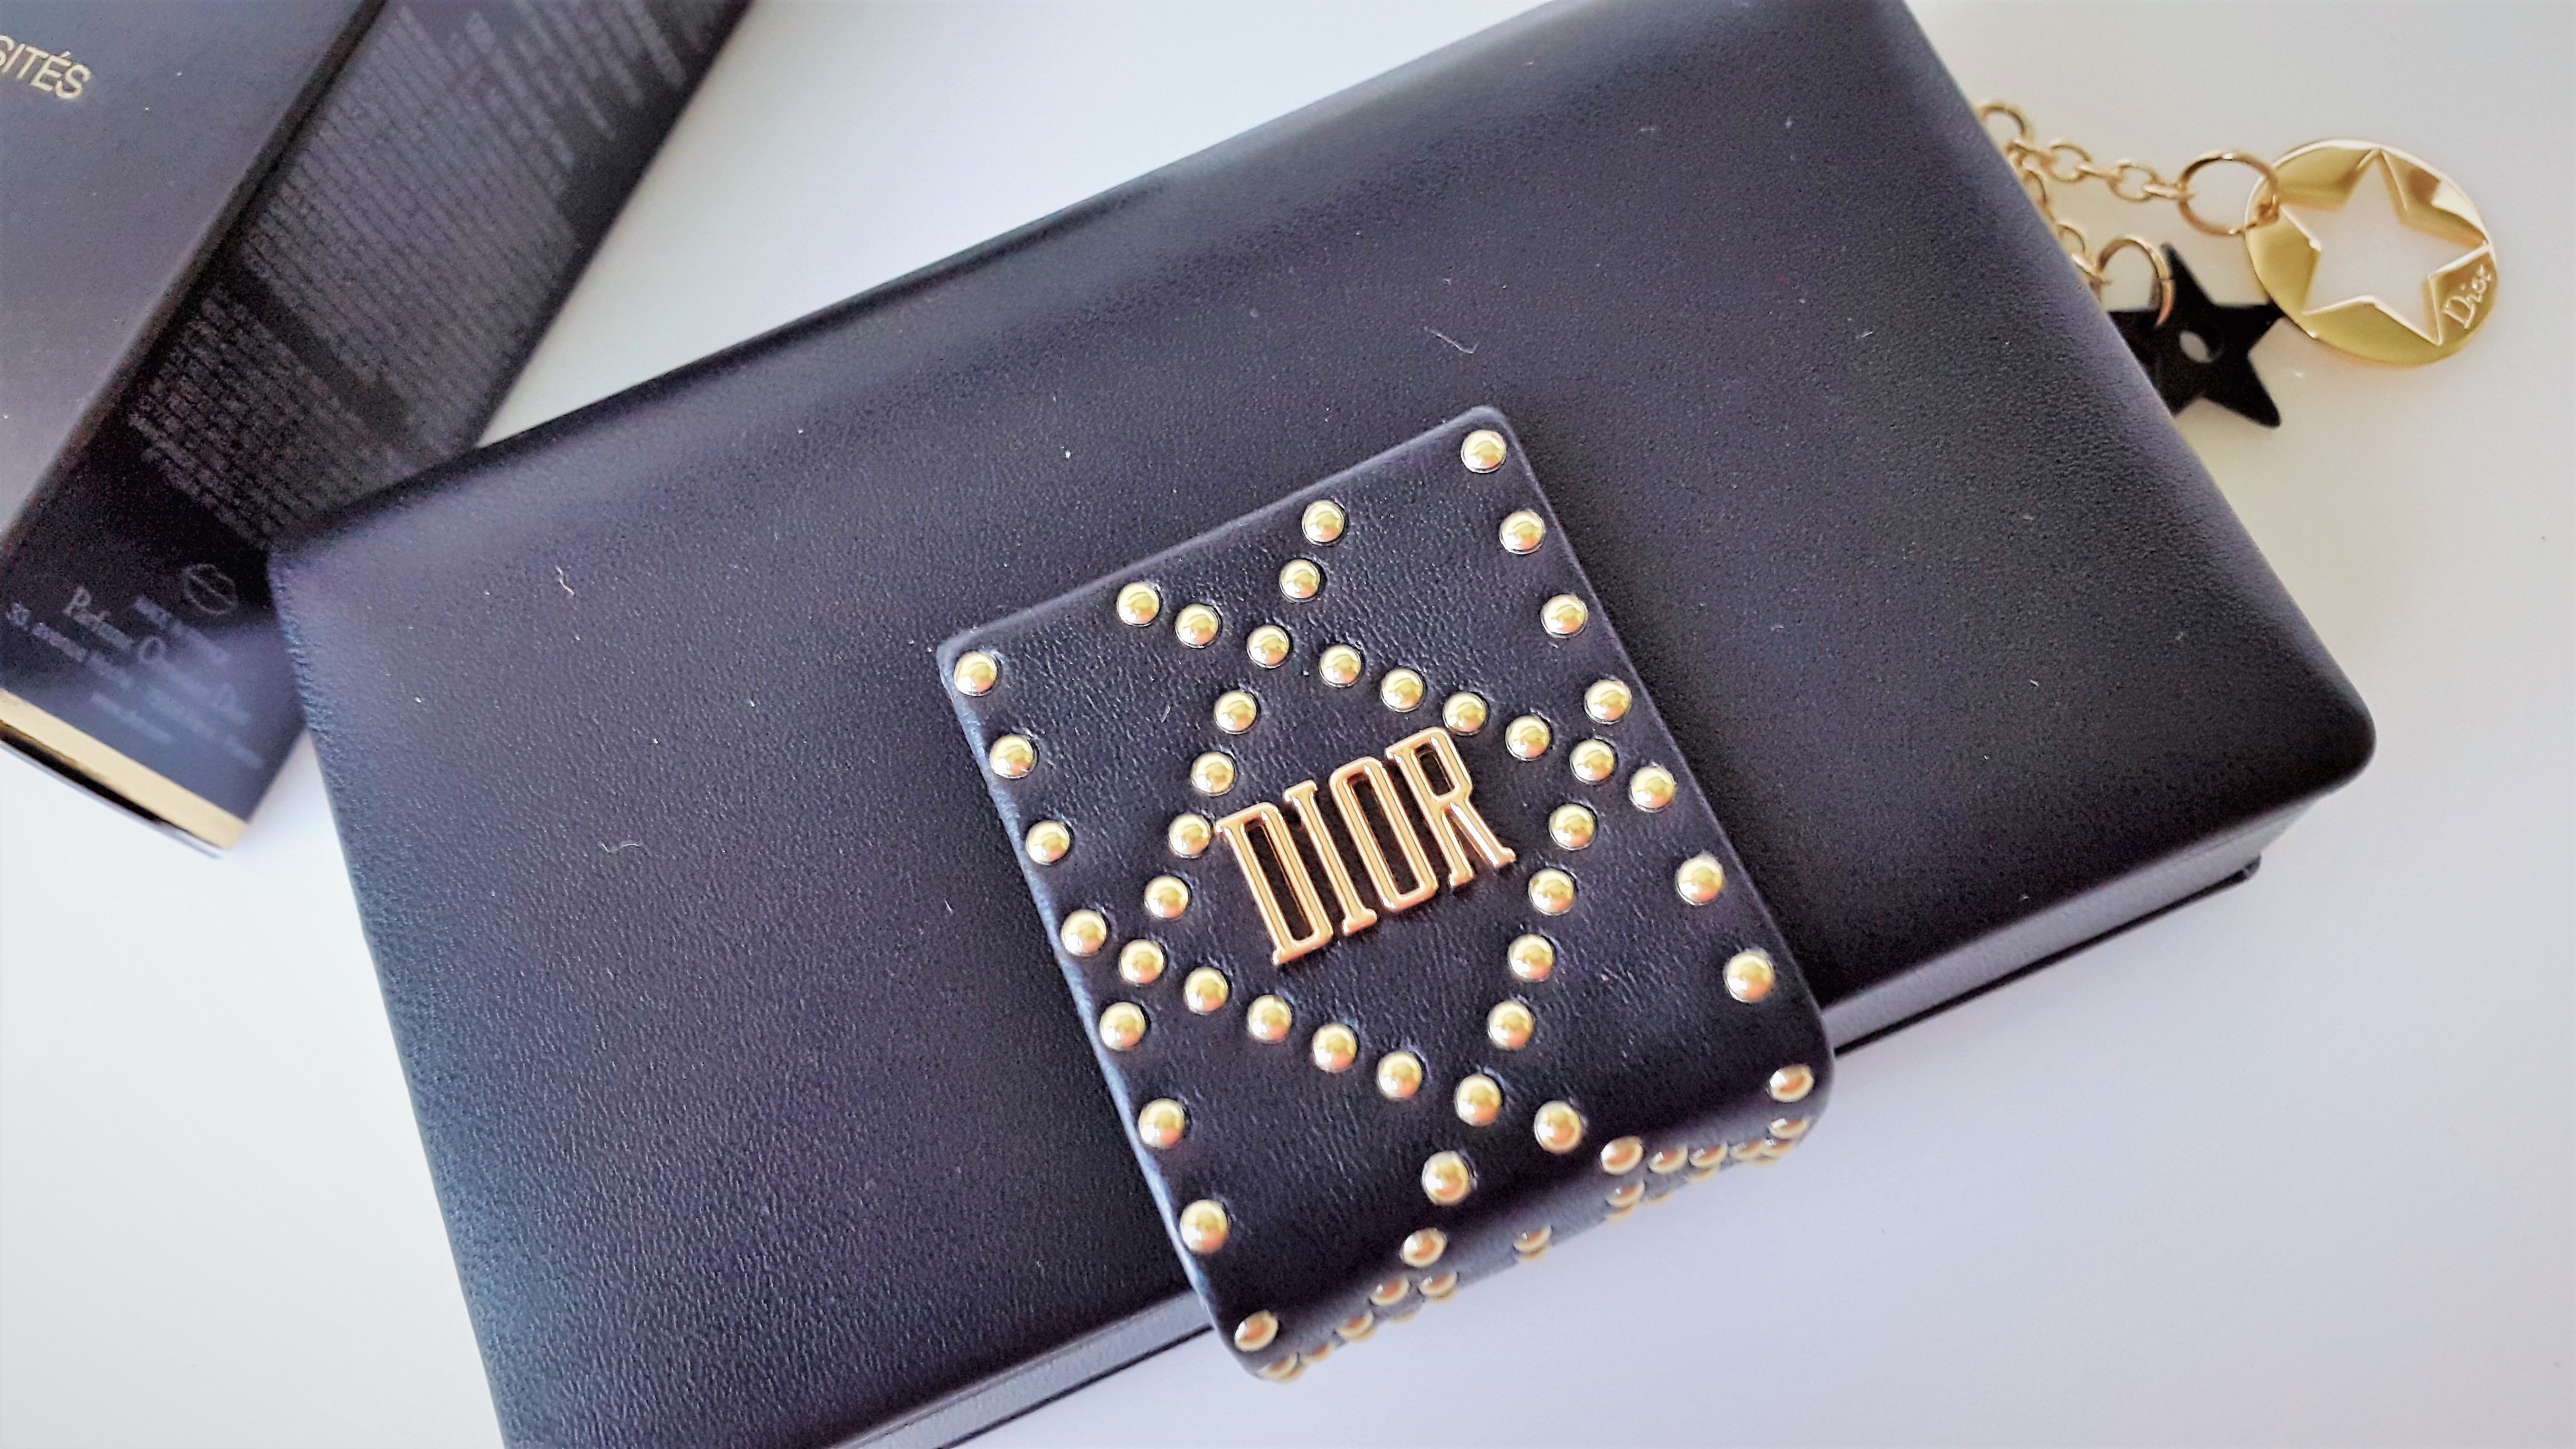 dior holiday couture collection daring eye palette